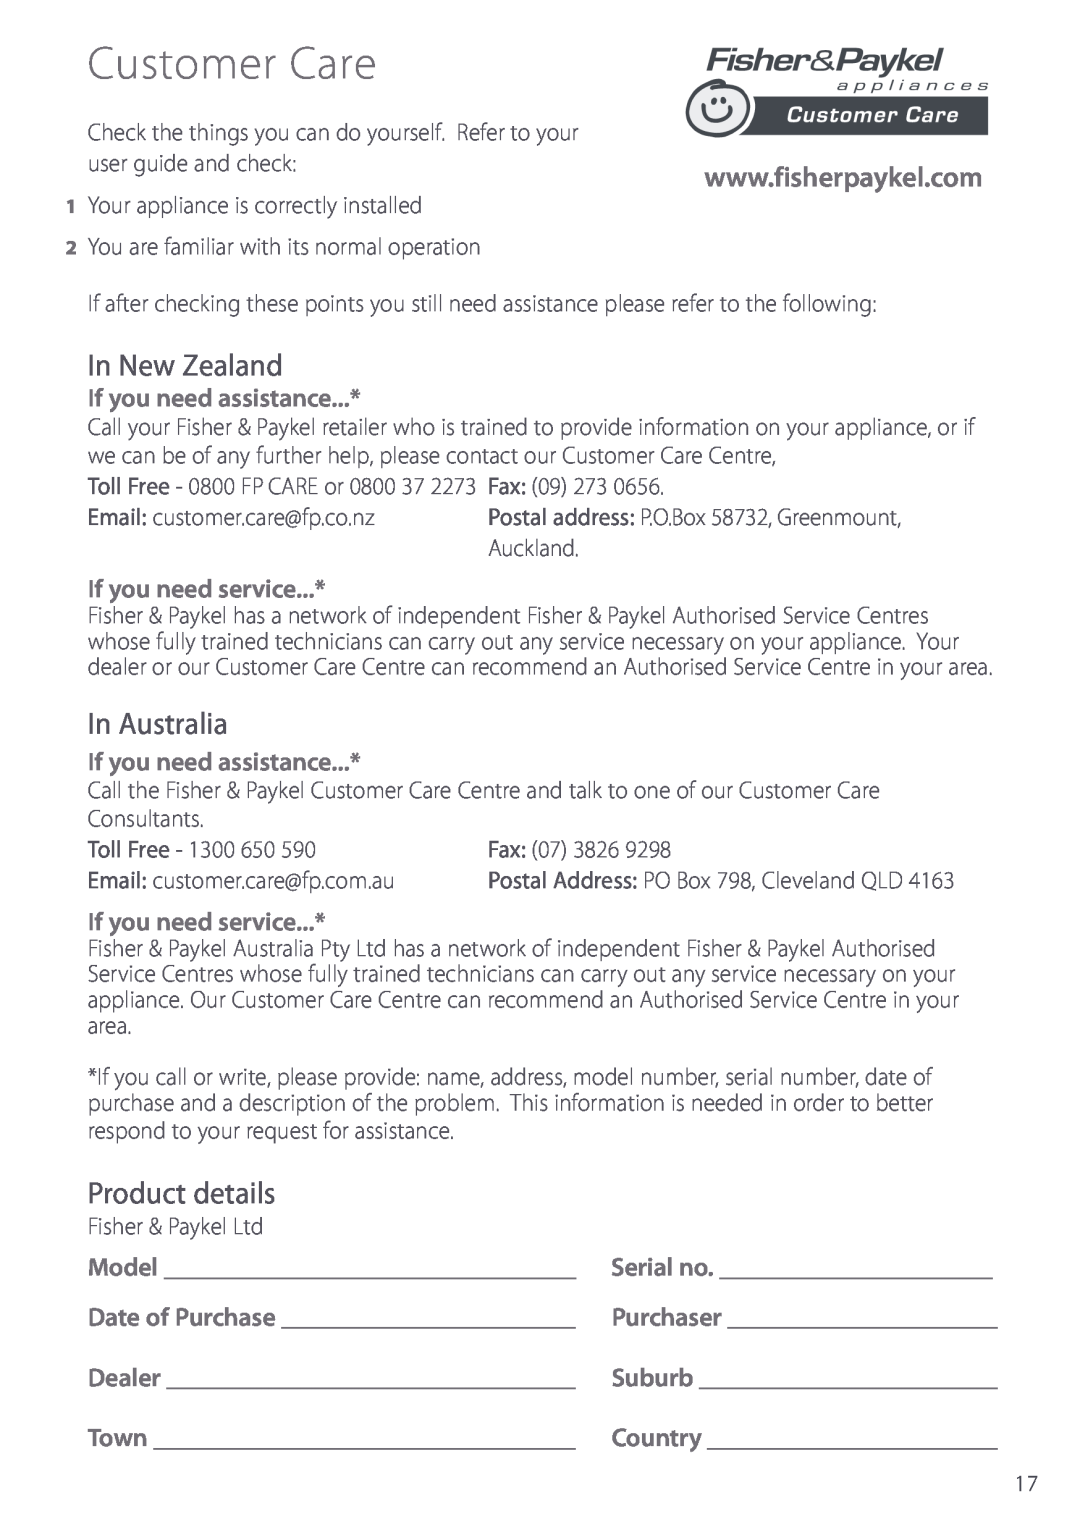 Fisher & Paykel CG913 manual Customer Care, In New Zealand, In Australia, Product details 